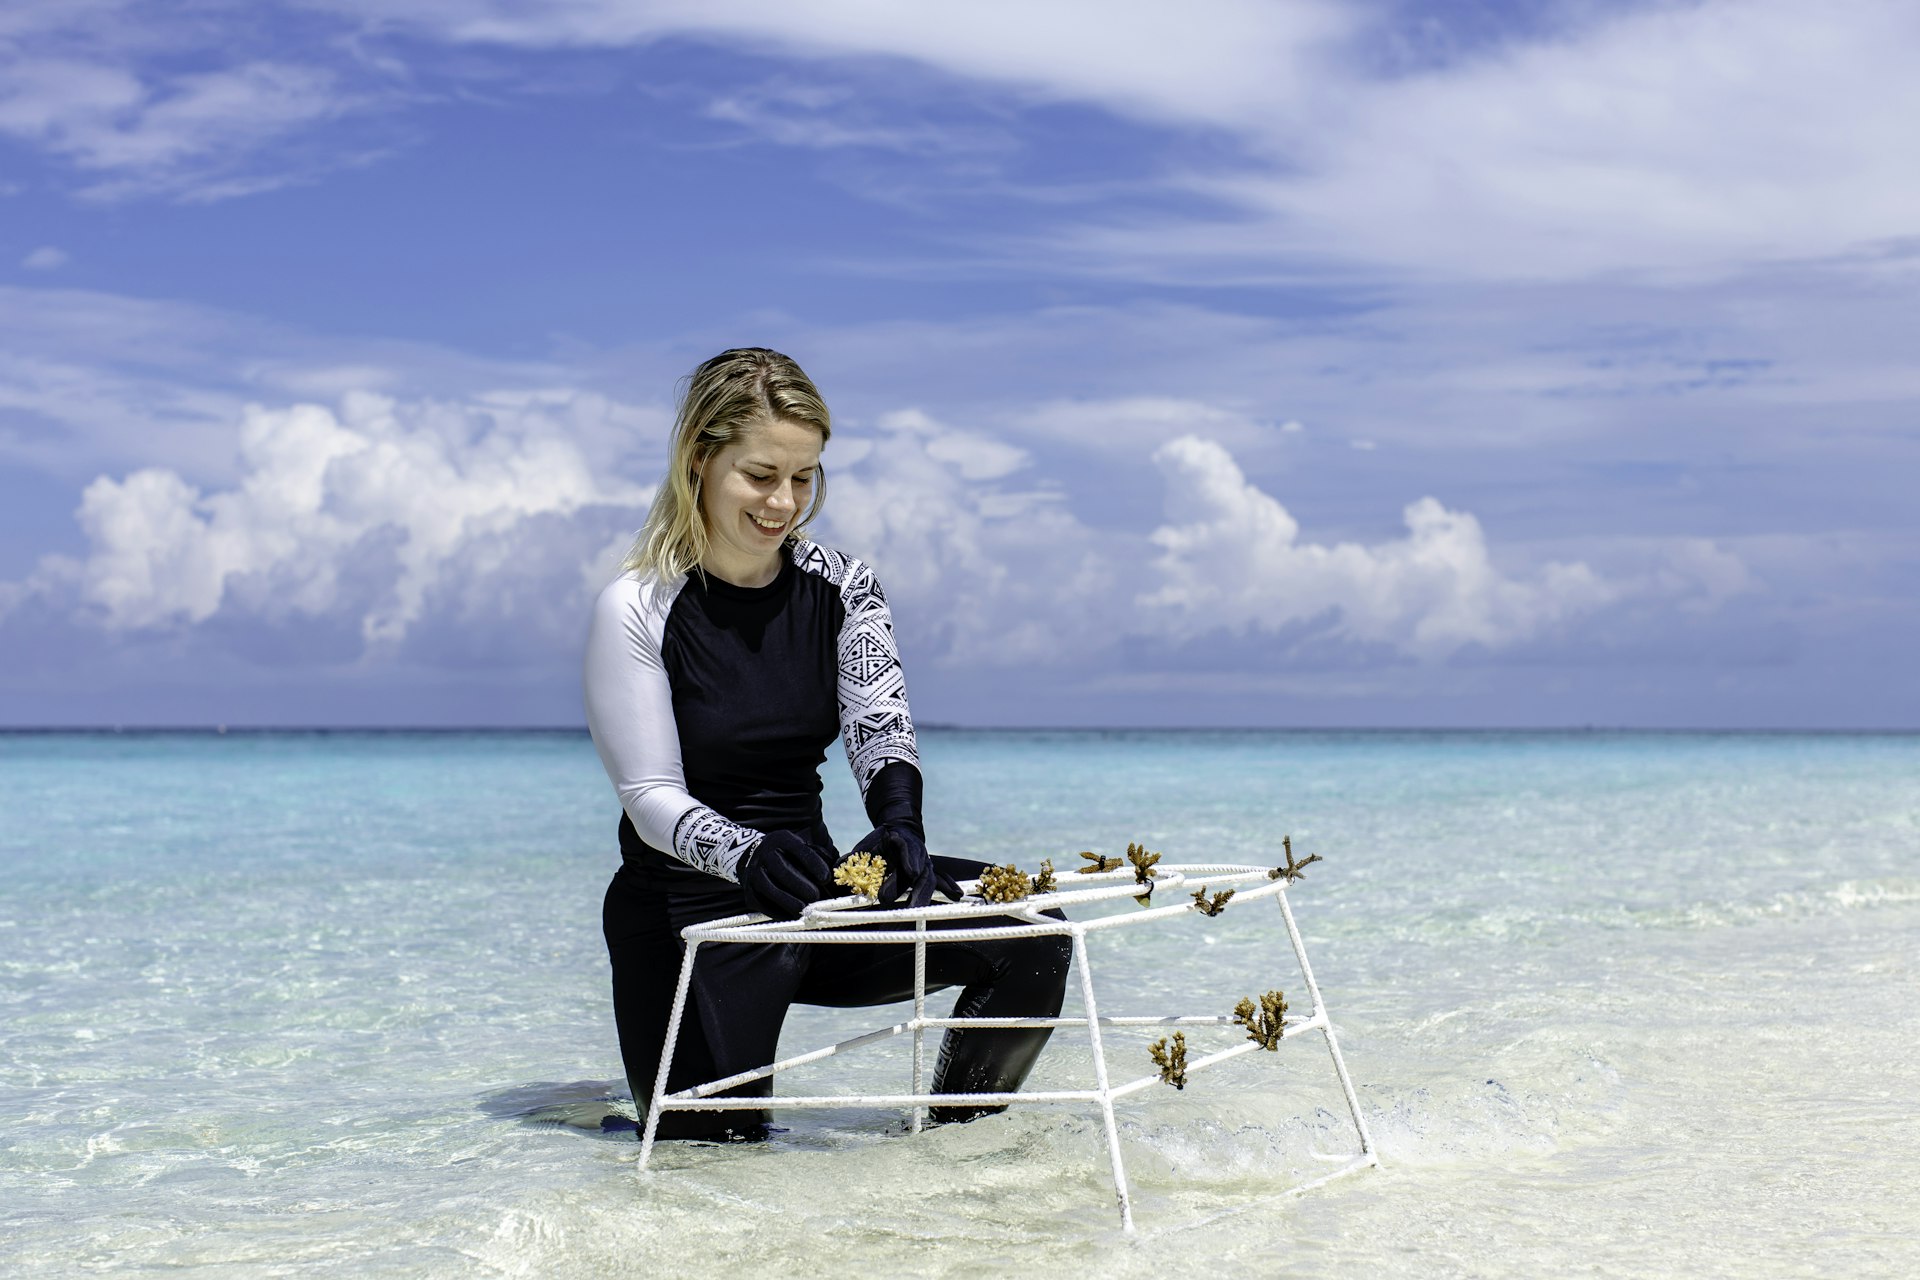 A woman tends to coral fragments, the Maldives